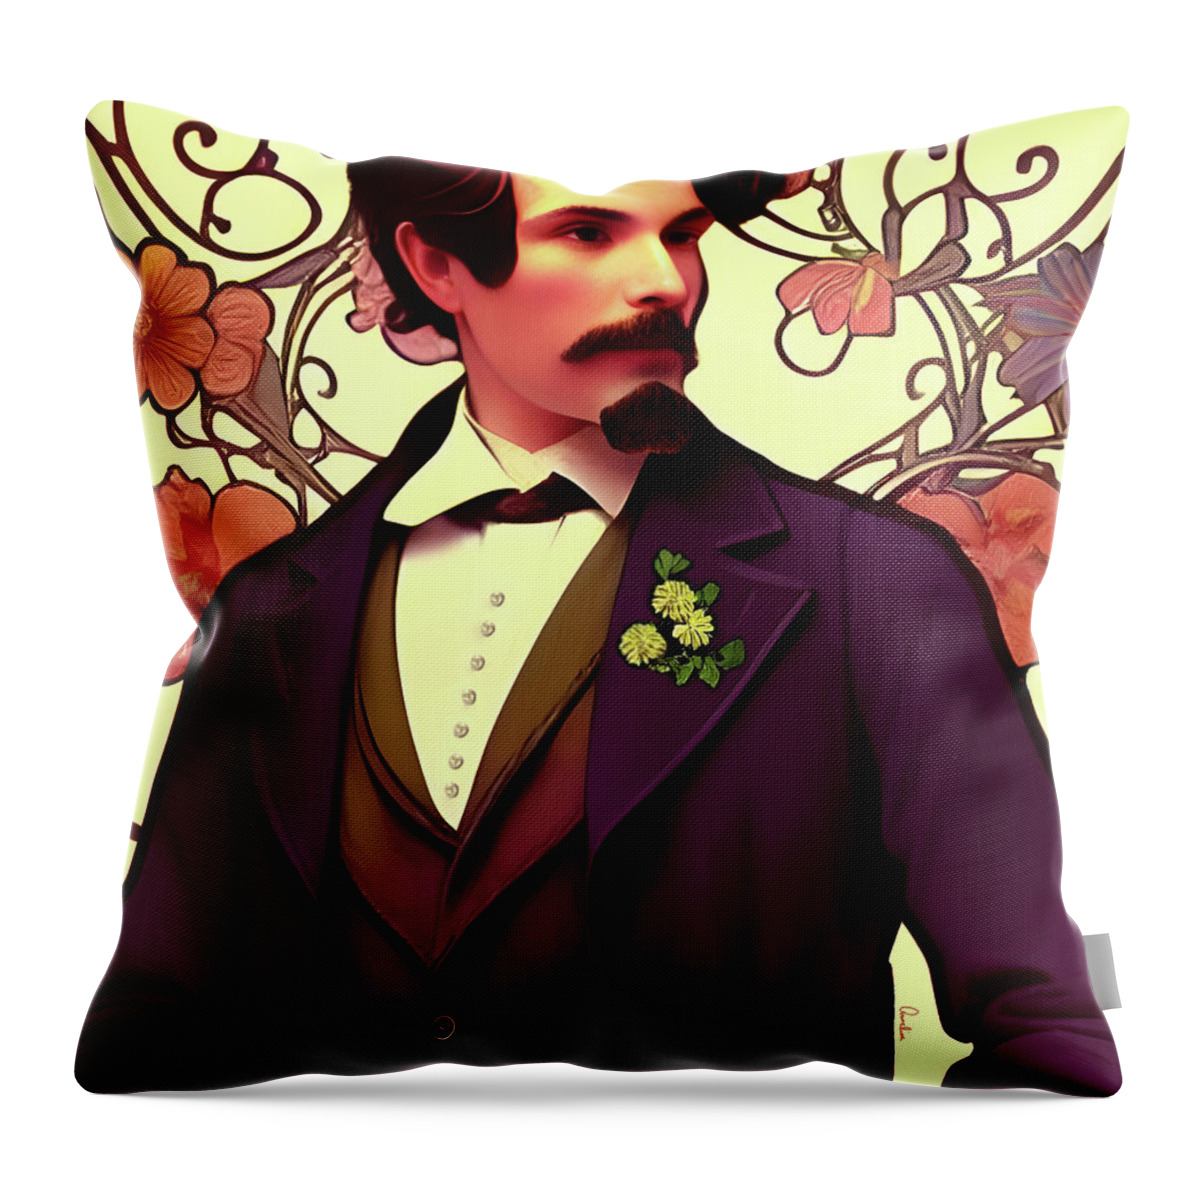 Love Throw Pillow featuring the digital art Handsome Suitor by Annalisa Rivera-Franz